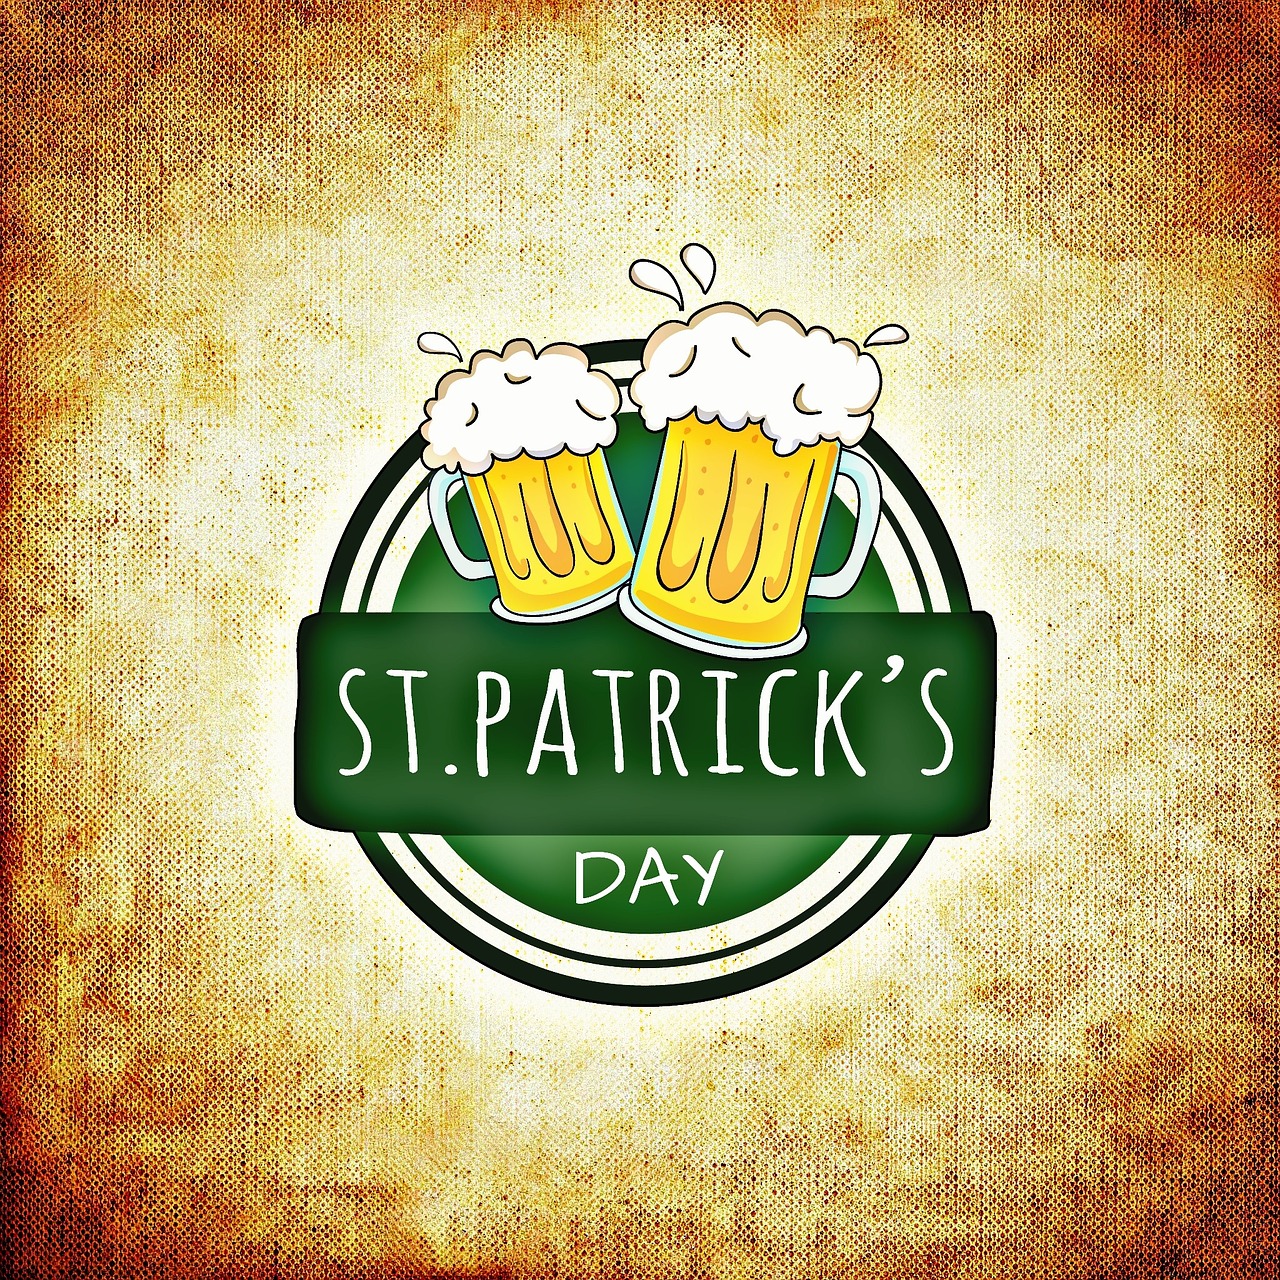 10 Places to Celebrate St. Patrick’s Day in Palm Springs